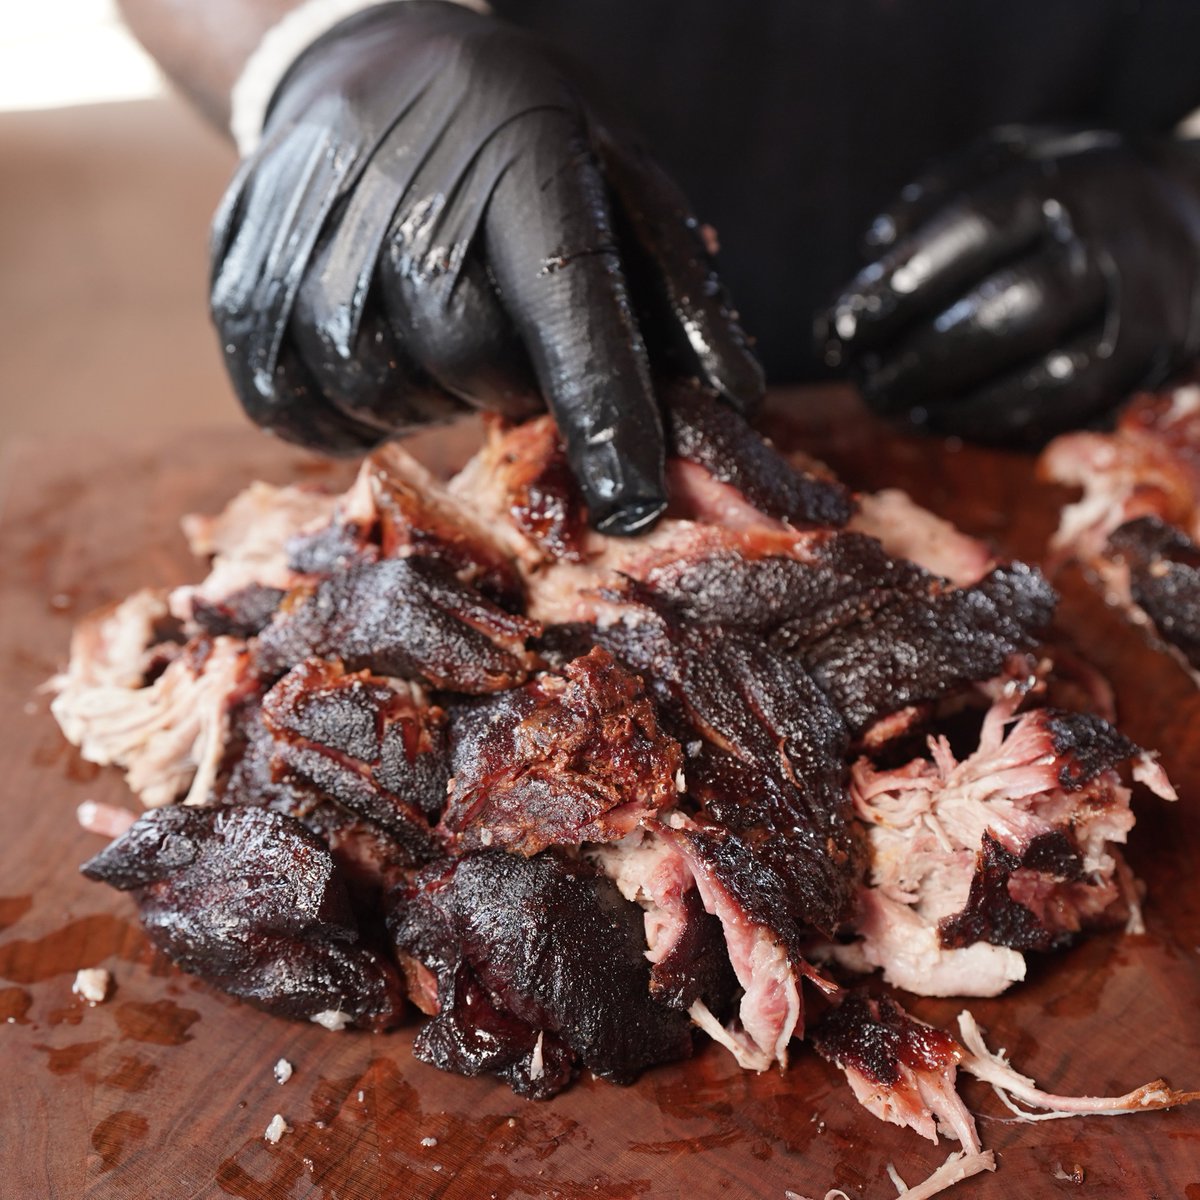 What do chihuahuas and this pulled pork have in common? A bark that won't quit 😂 #pulledpork #bbqjokes #kosmosq #itjustwins